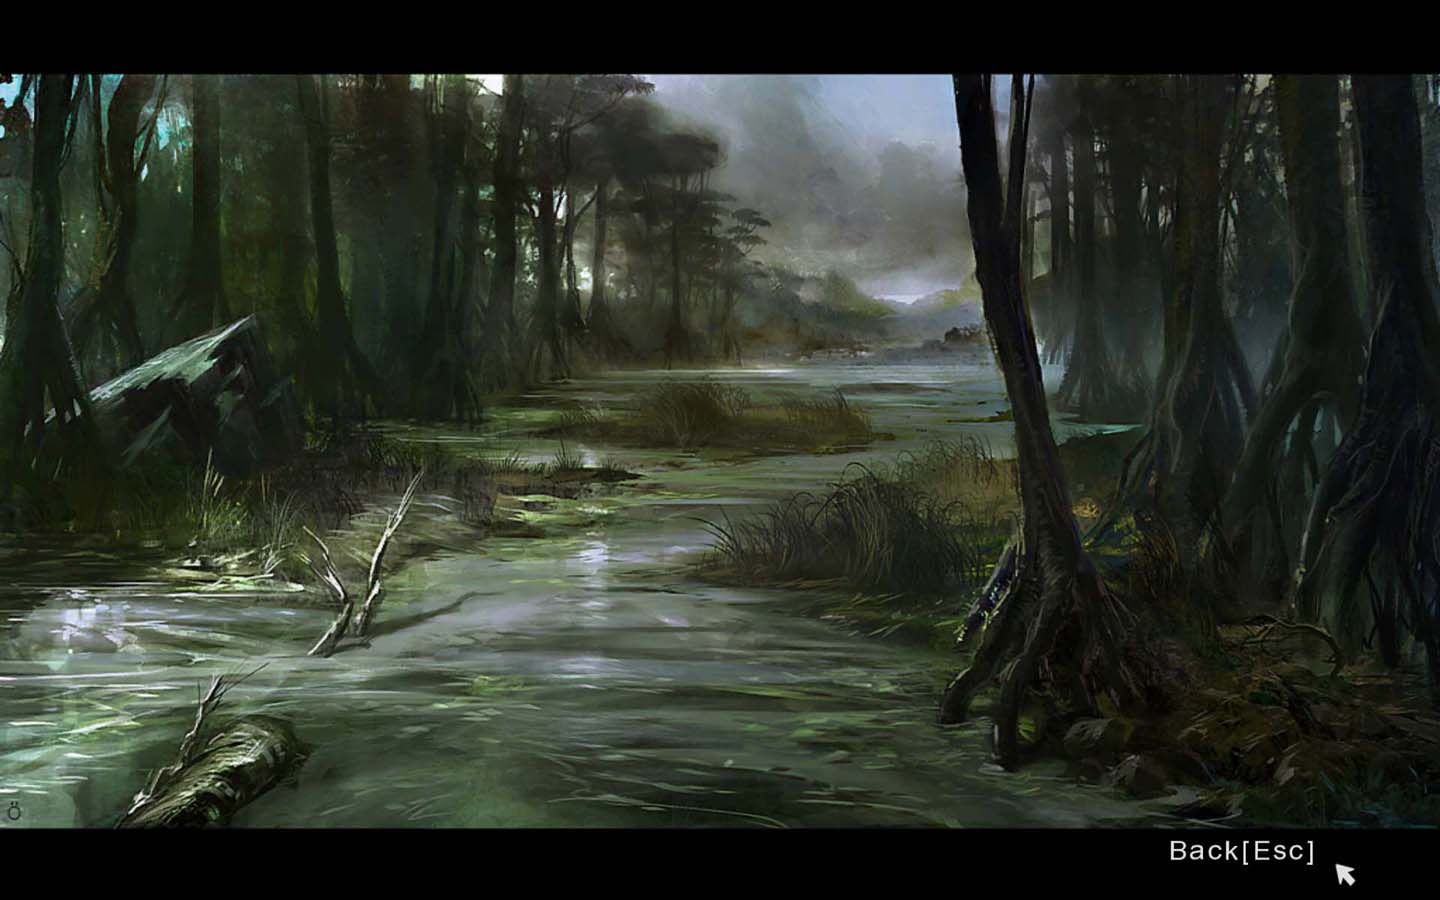 Swampy jungle, kind of like what you go through when running from ol' ...